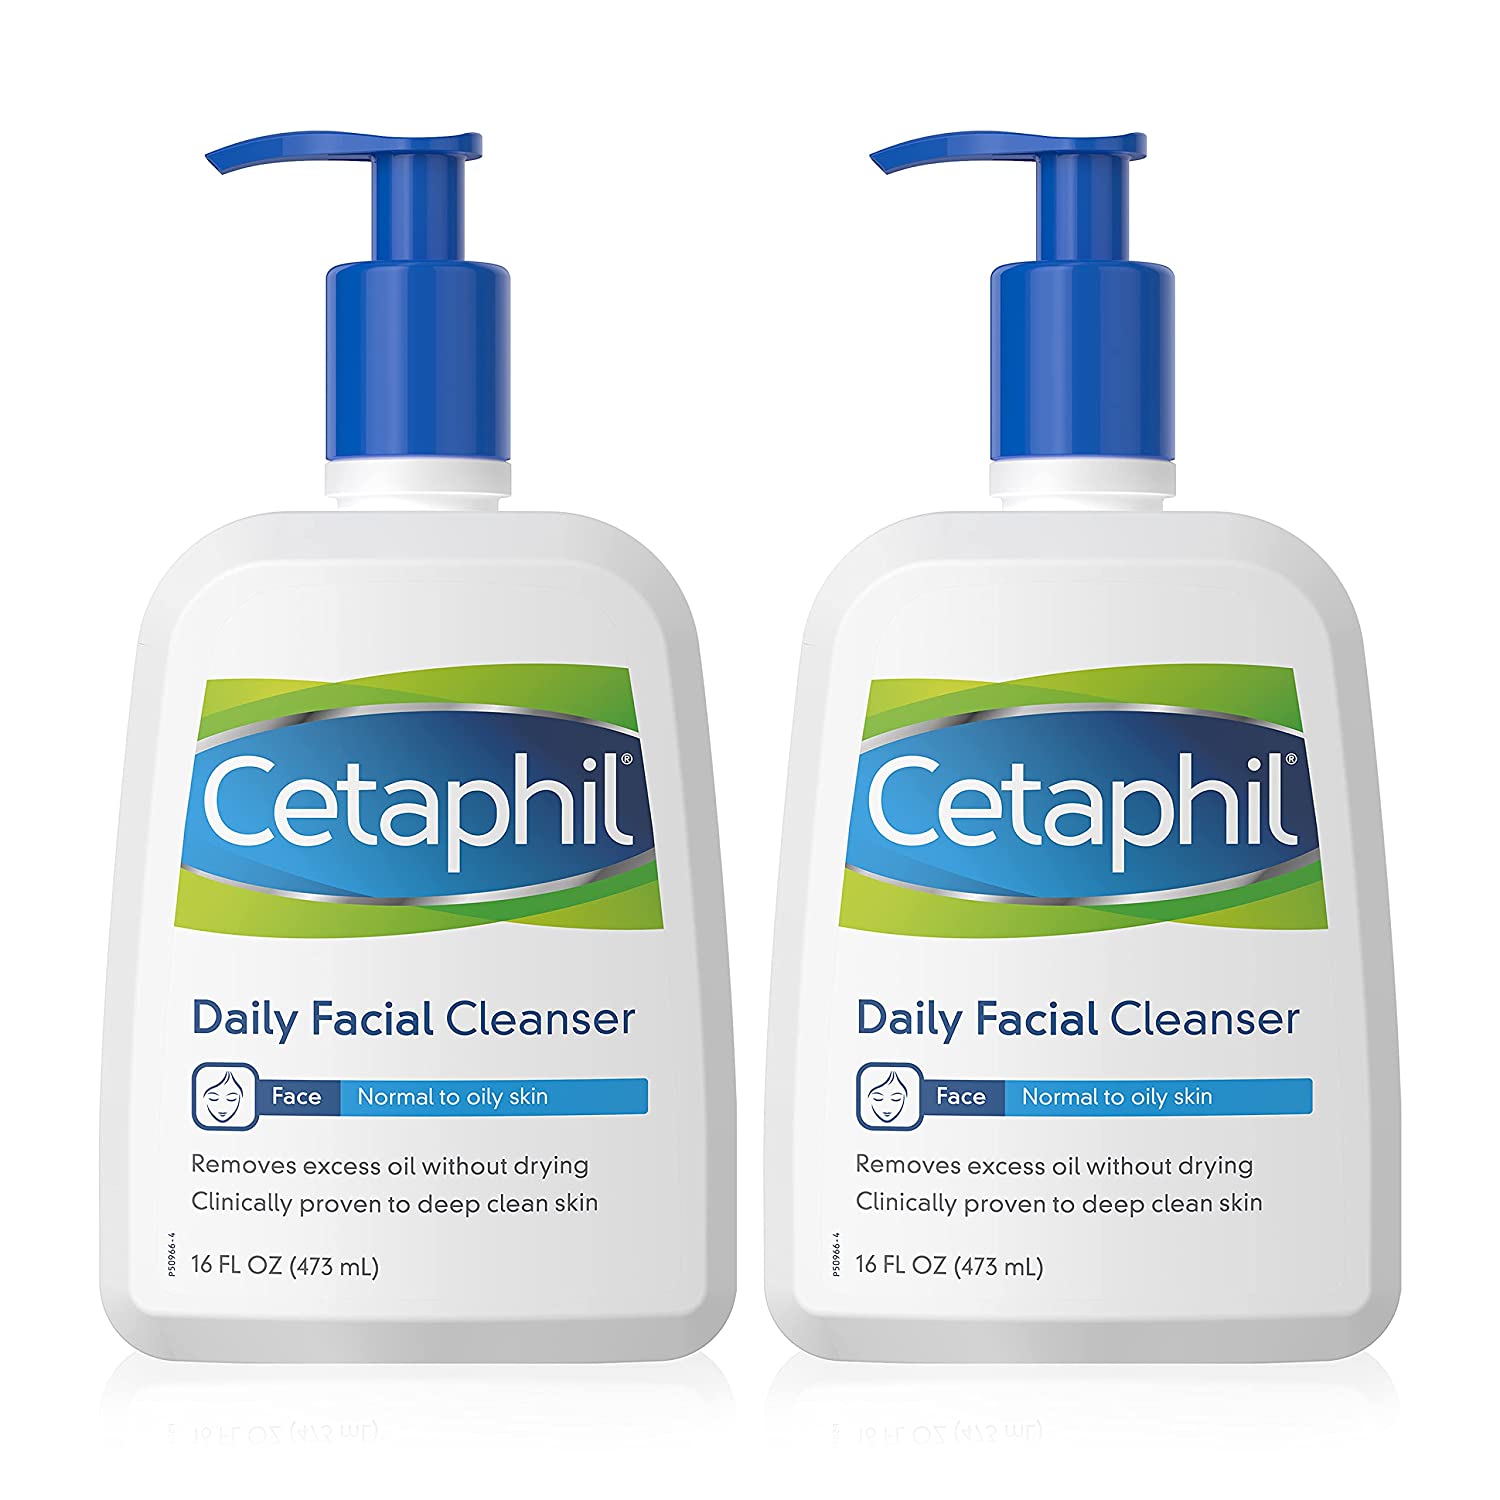 CETAPHIL Daily Facial Cleanser